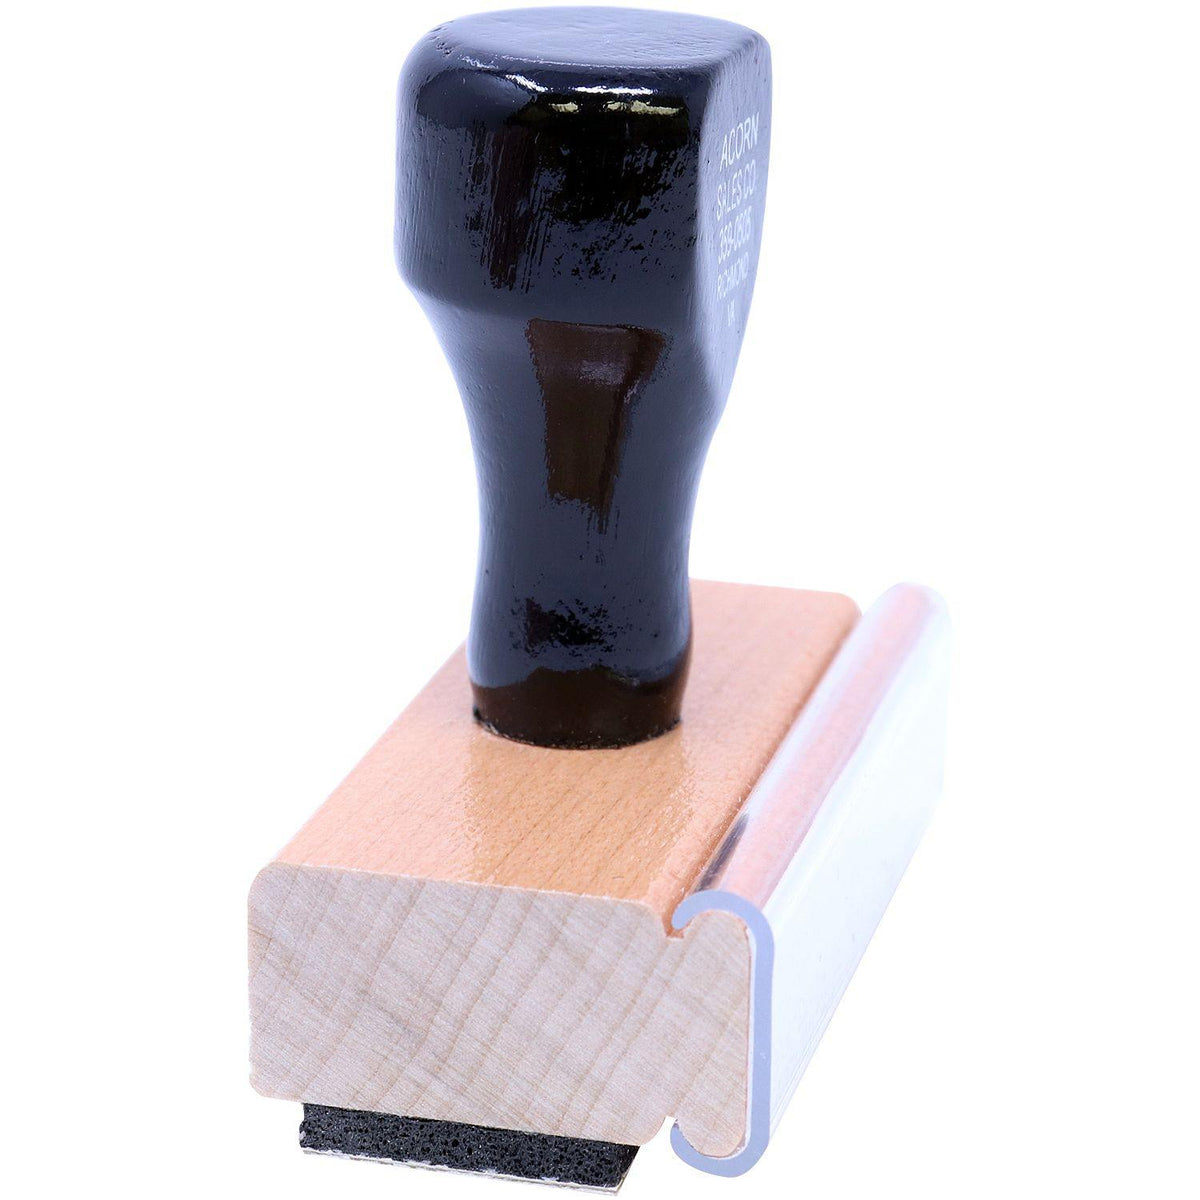 Side View of Large Meet With Teacher Rubber Stamp at an Angle